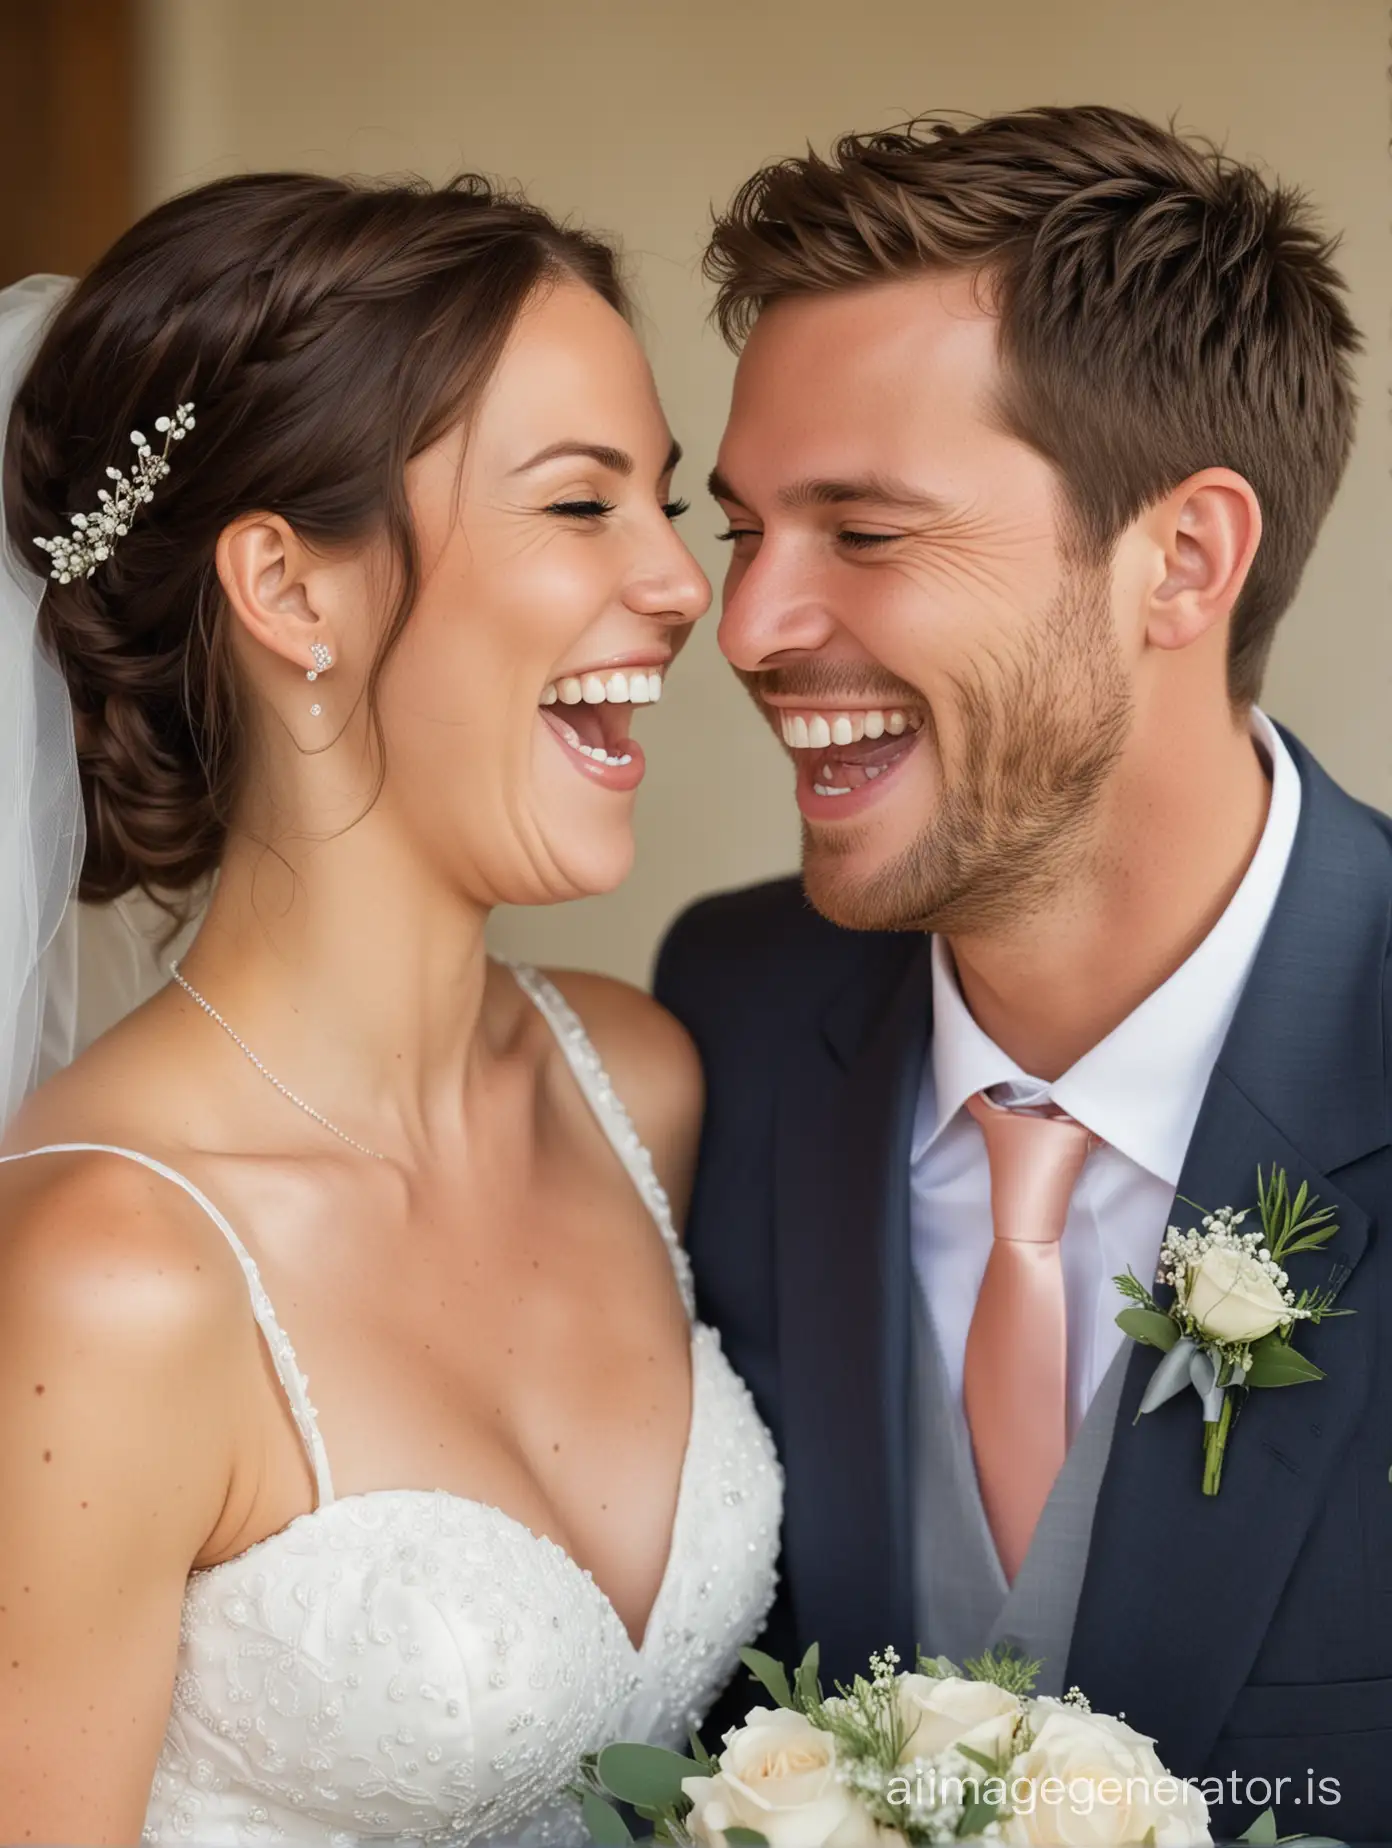 Joyful-Bride-and-Groom-Sharing-Laughter-at-Wedding-Ceremony